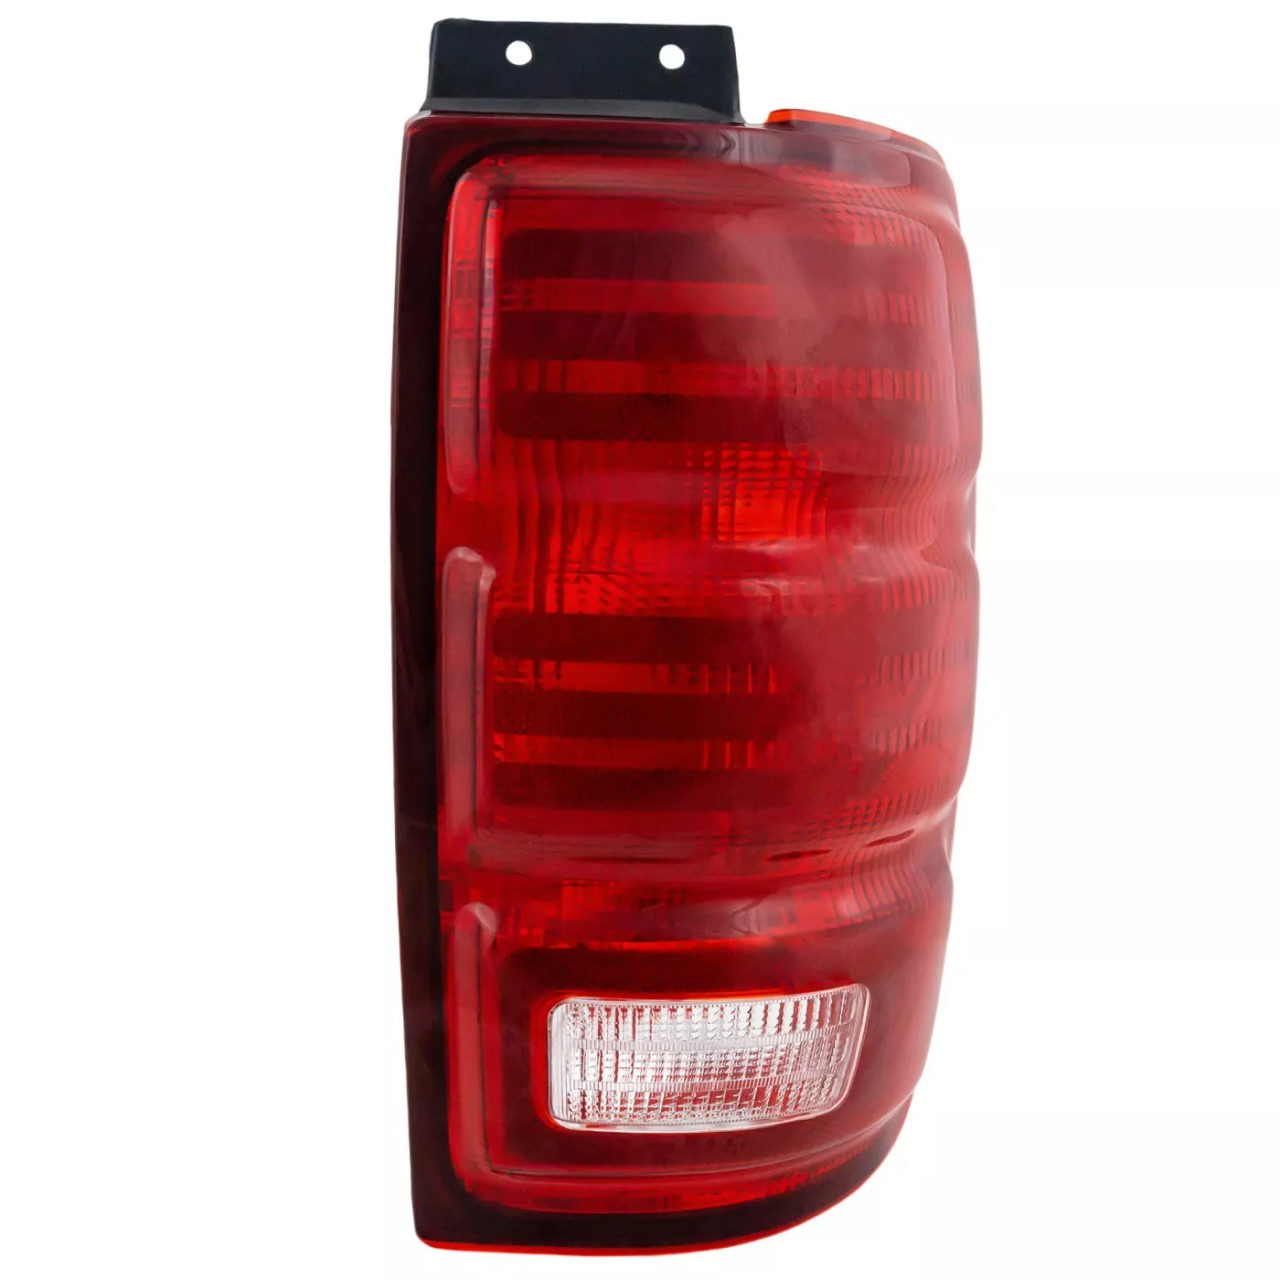 Set of 2 Tail Light For 97-2002 Ford Expedition XLT LH & RH